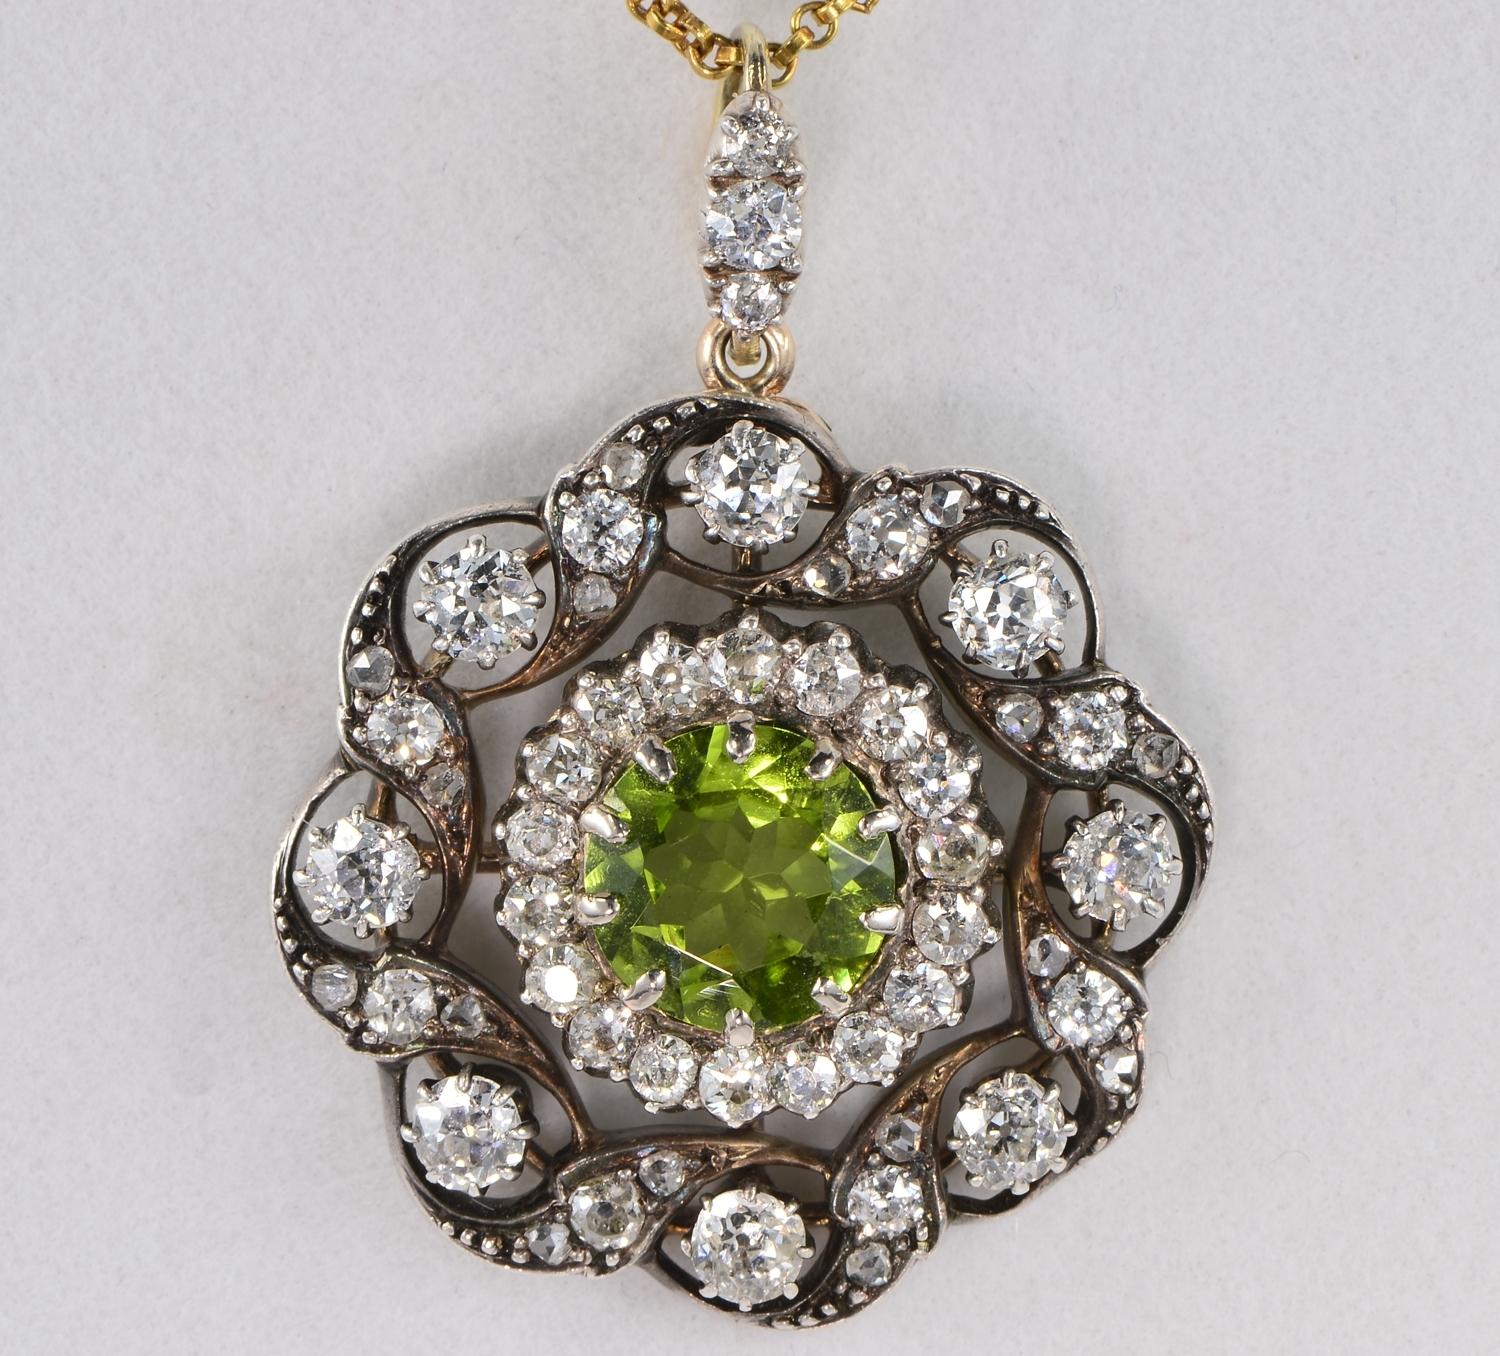 This marvellous Victorian brooch pendant is 1880 ca
Hand crafted of solid 18 Kt gold with silver portions in a round shape
Principle stone is a bright and sparkly round faceted cut natural Peridot of vivacious lime green colour, 2.60 Ct – 9.09 mm.